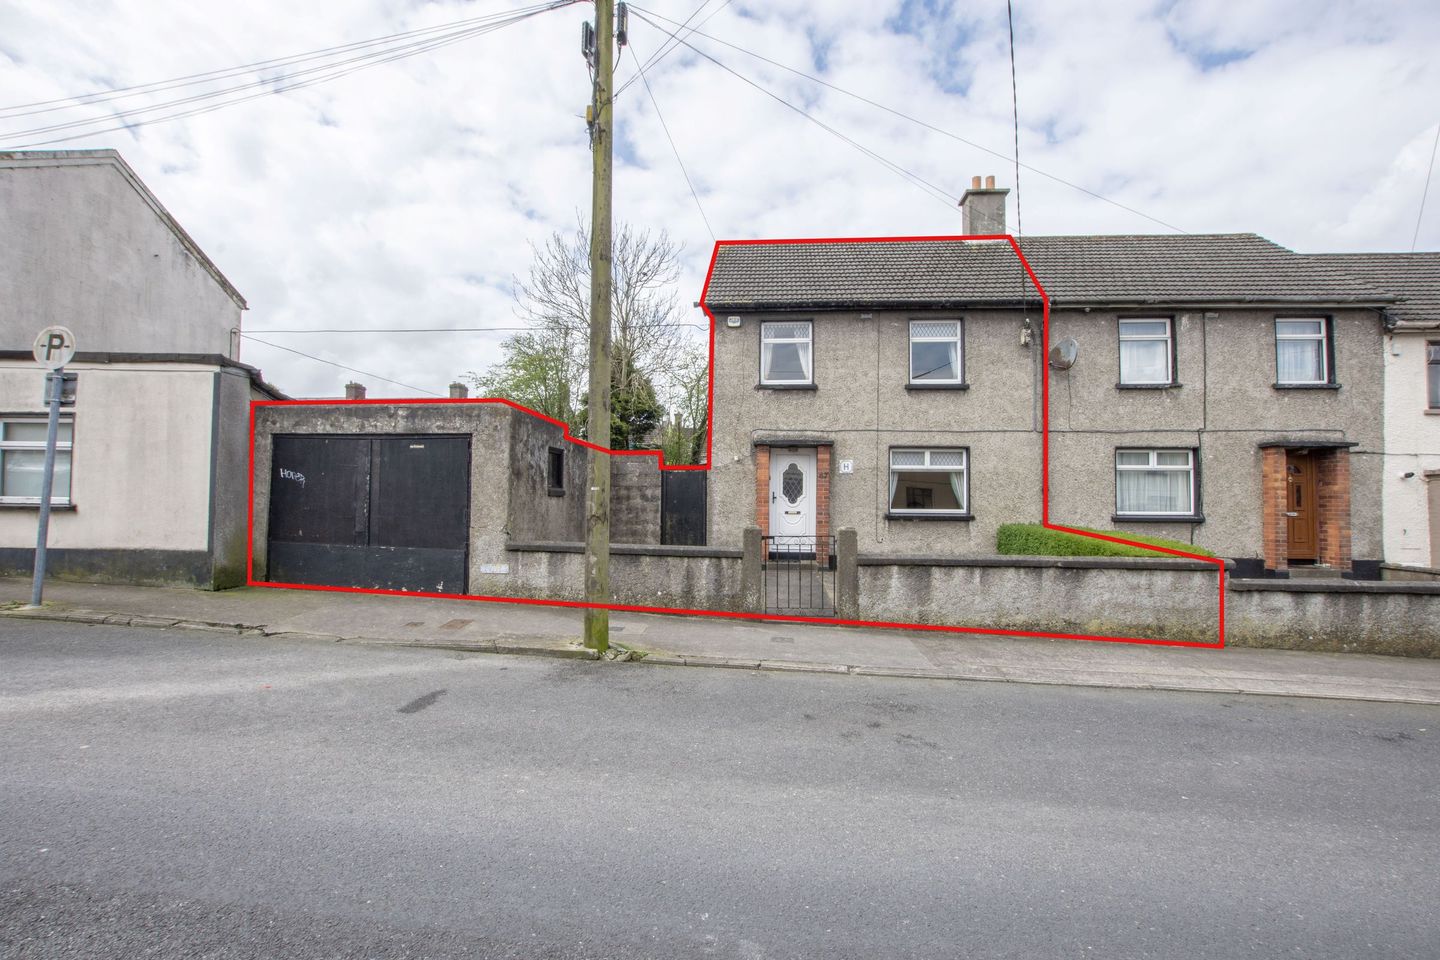 67 Mount Sion Avenue, Waterford City, Co. Waterford